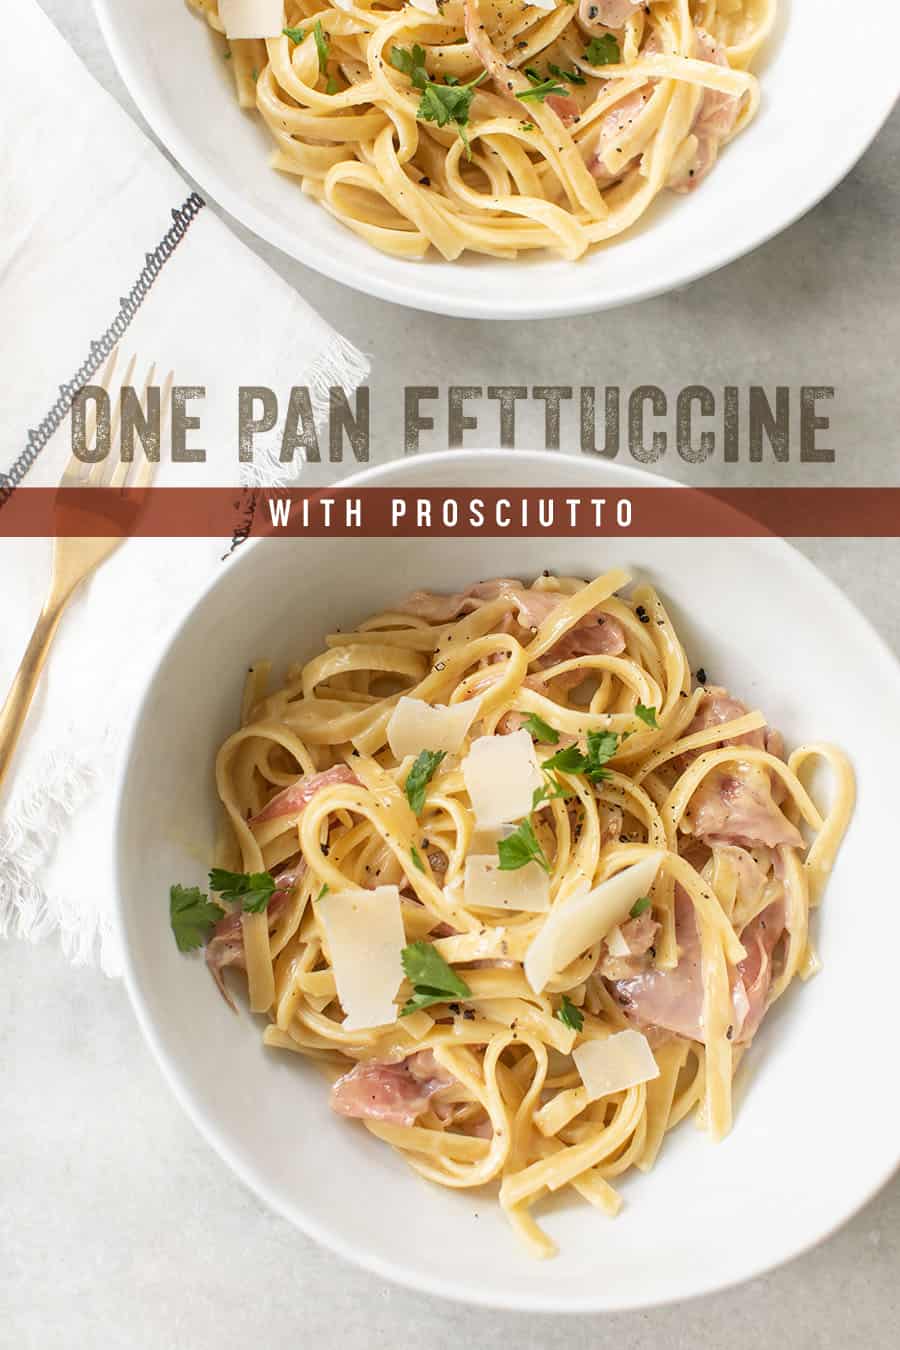 One Pan Fettuccine with Prosciutto with graphic.